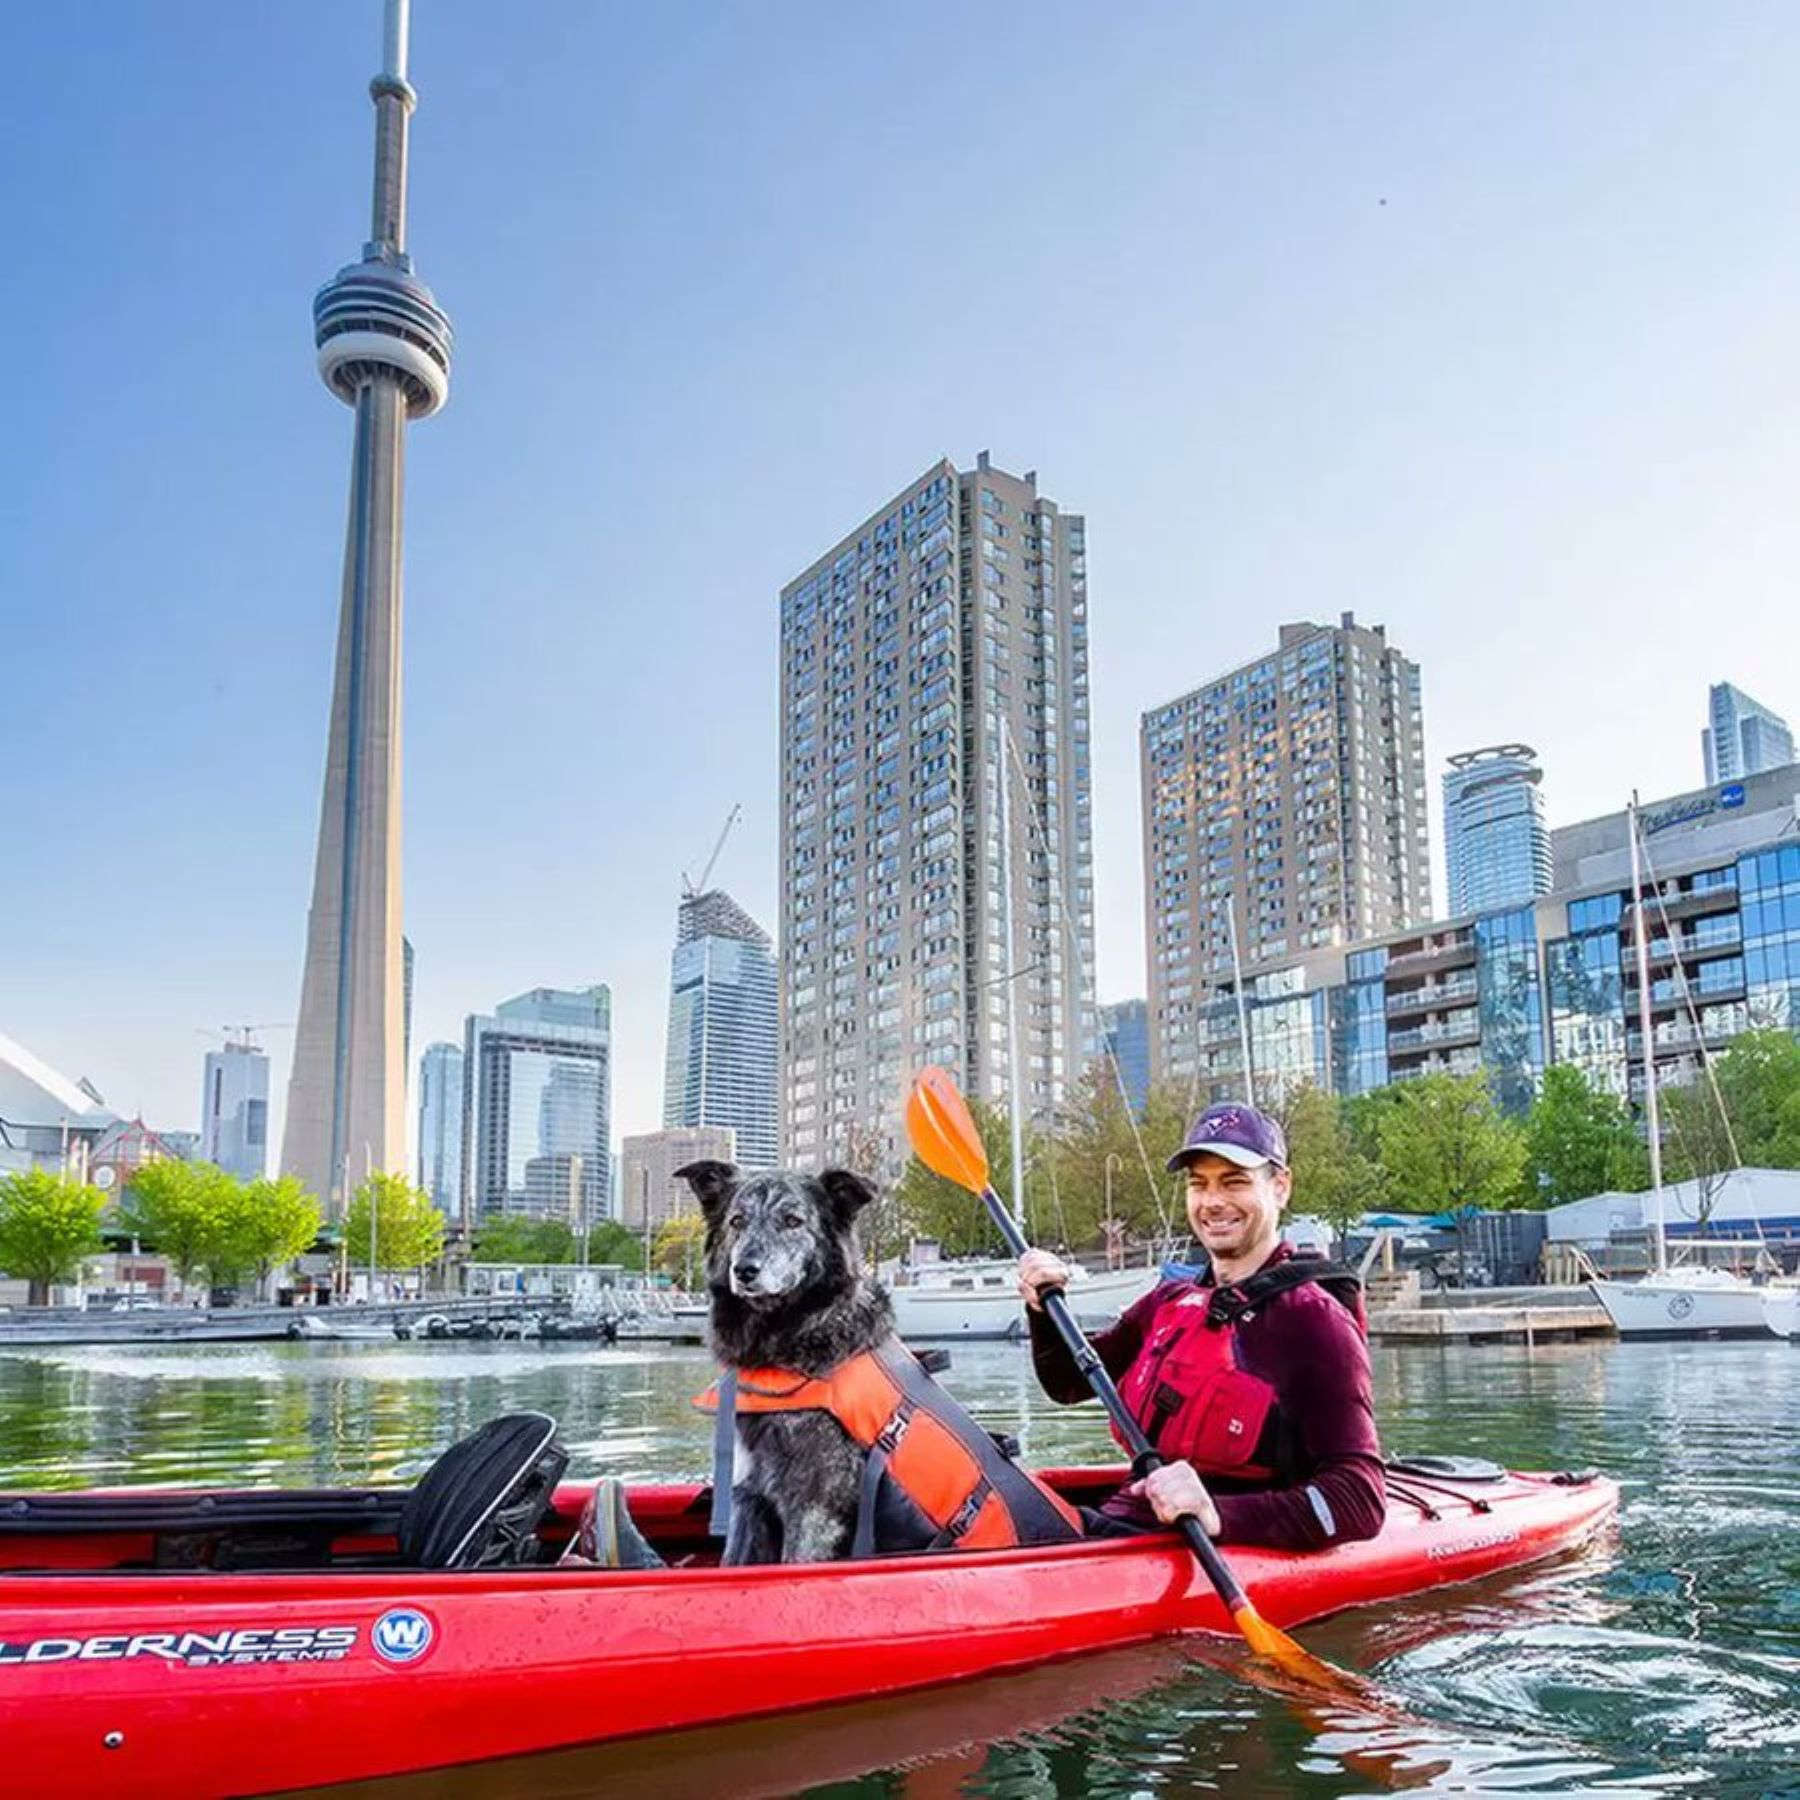 Molly and Toby Heaps, who ran for mayor of Toronto, kayak in a river.